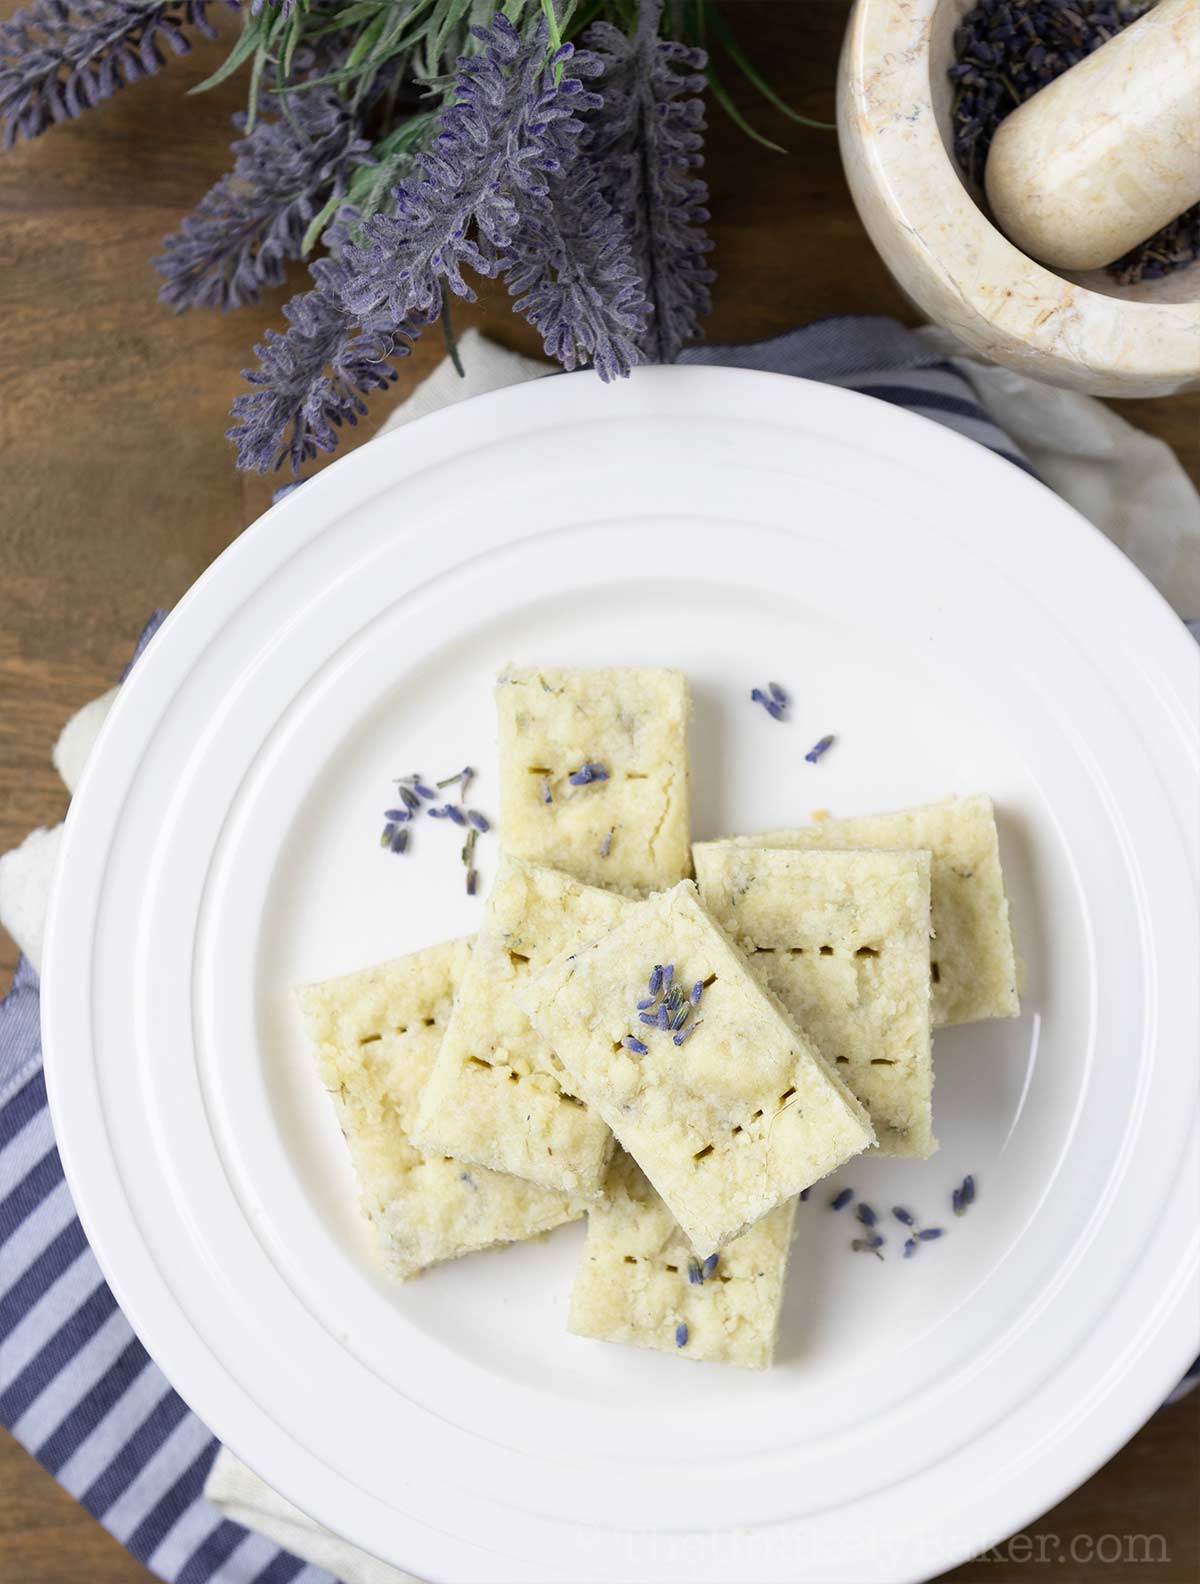 Lavender shortbread cookies on a plate.